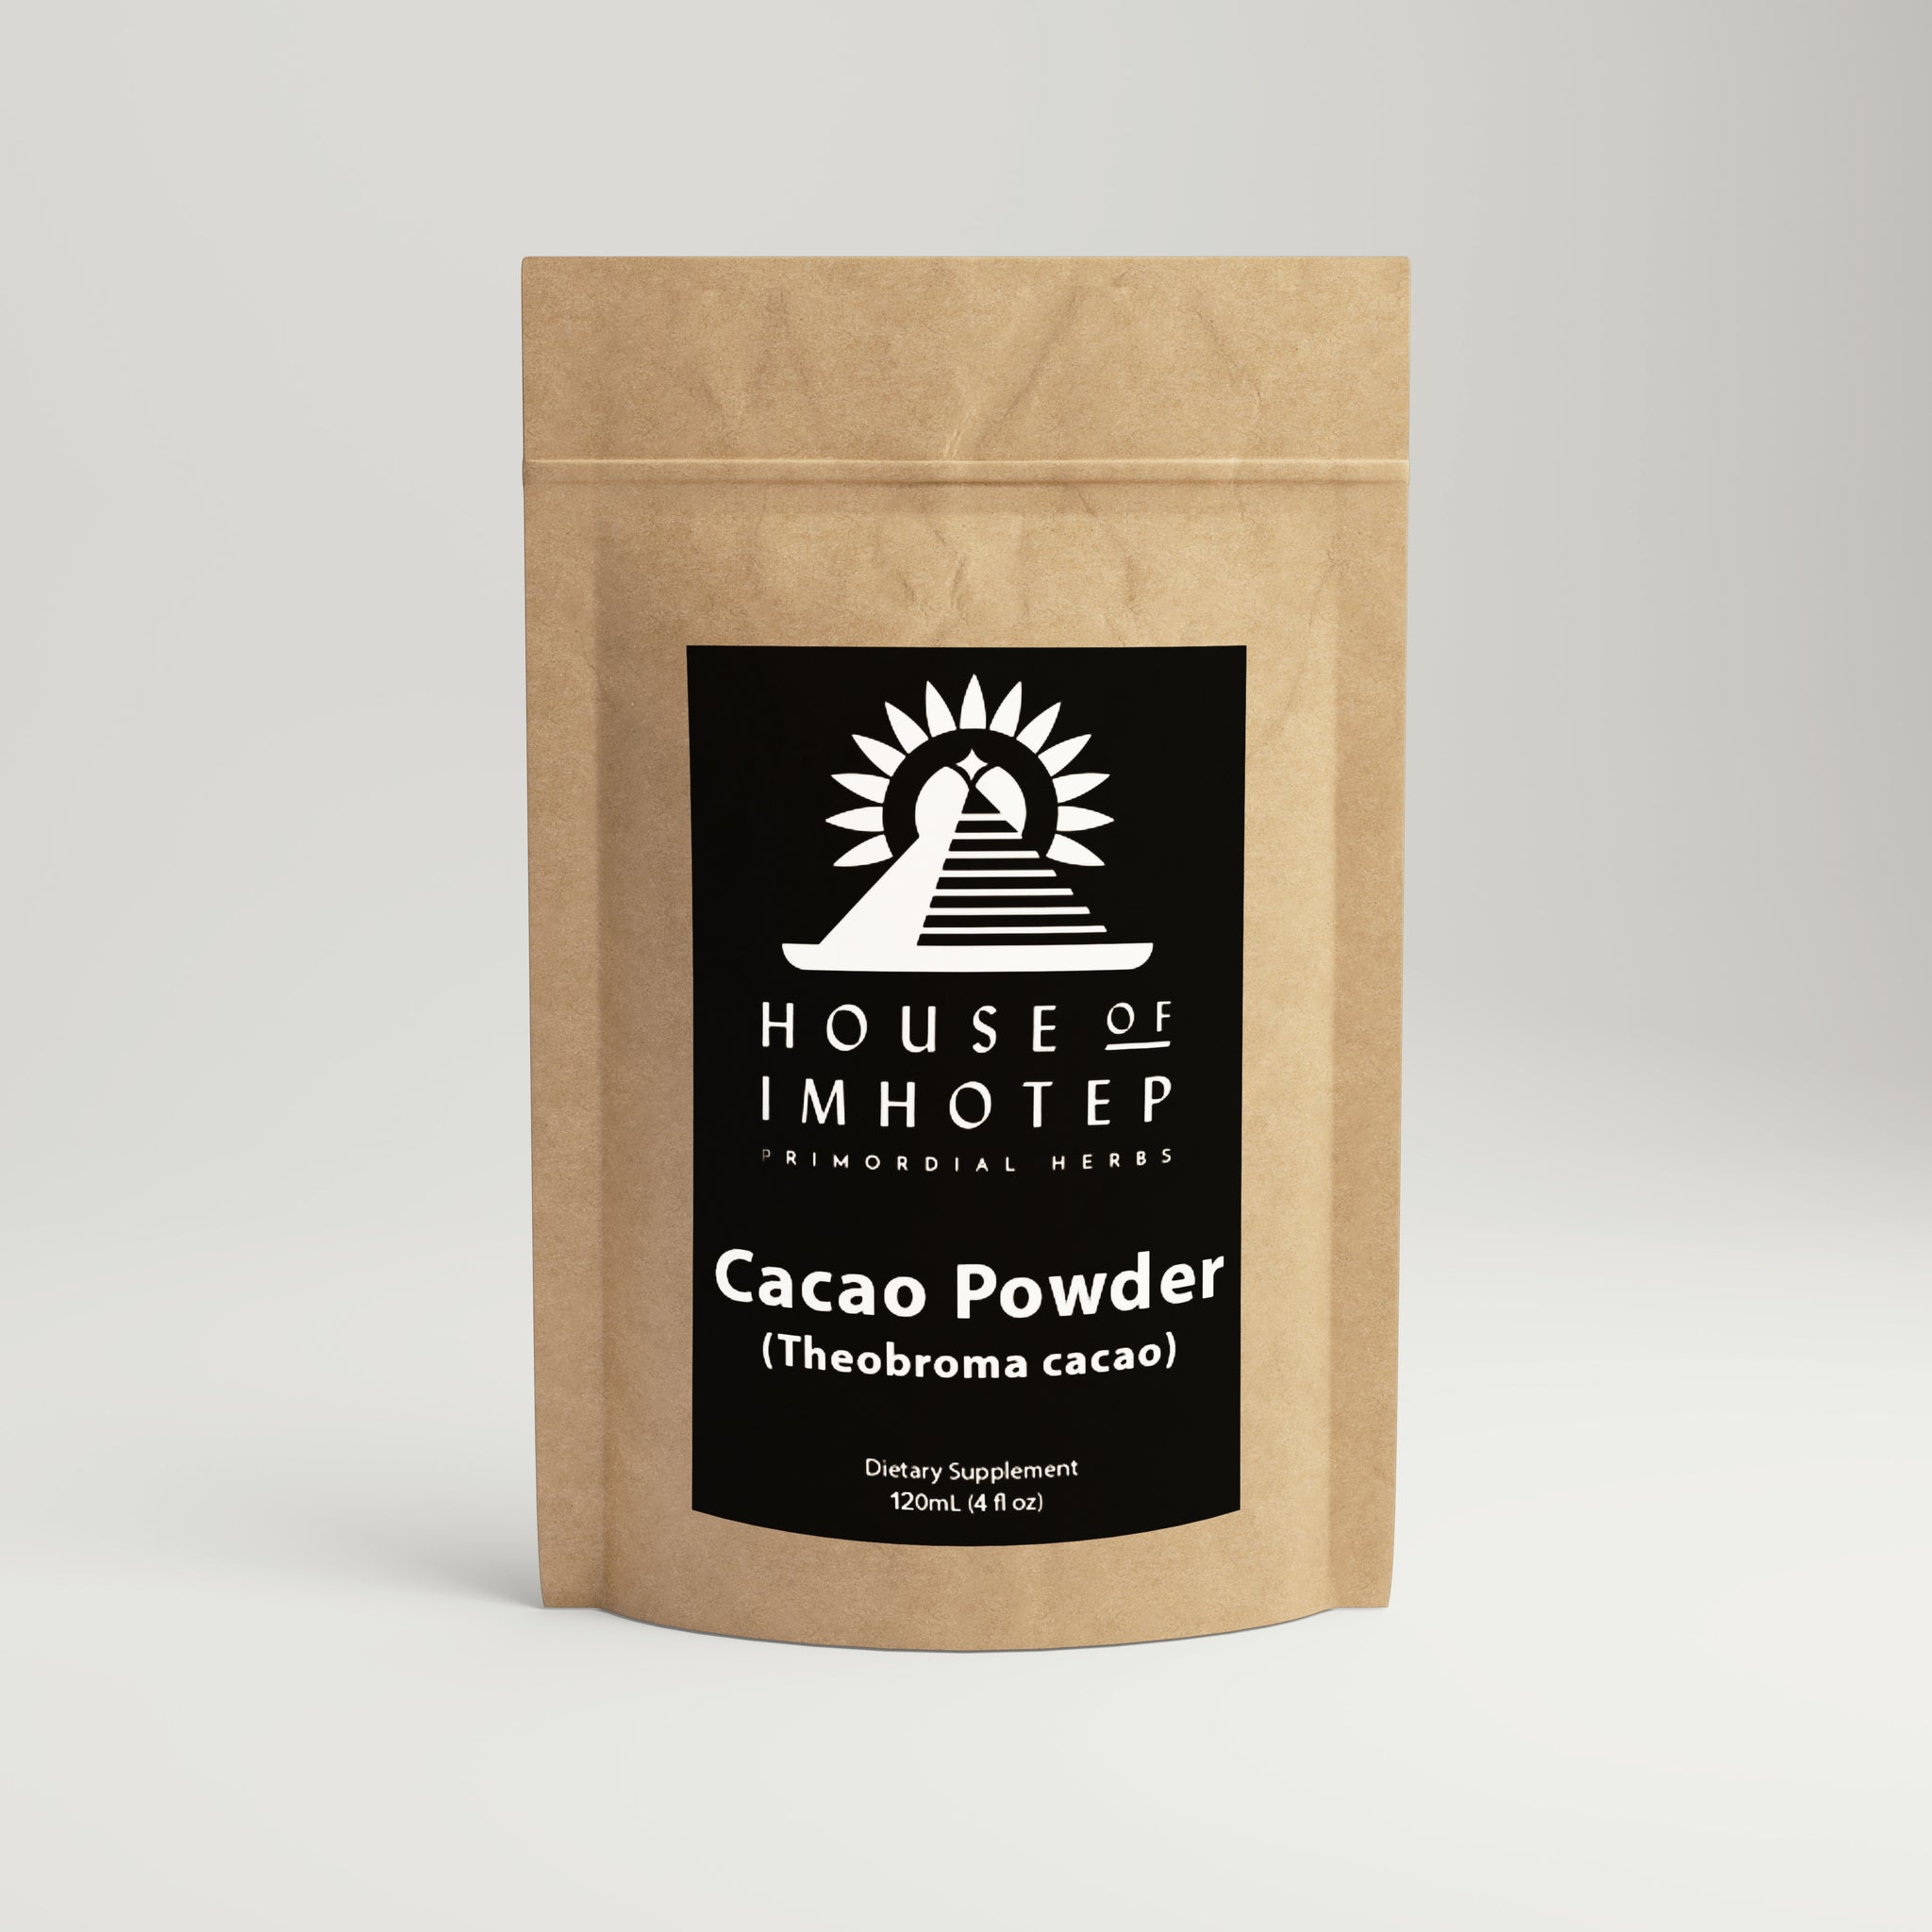 The Cacao powder Roasted  energy booster